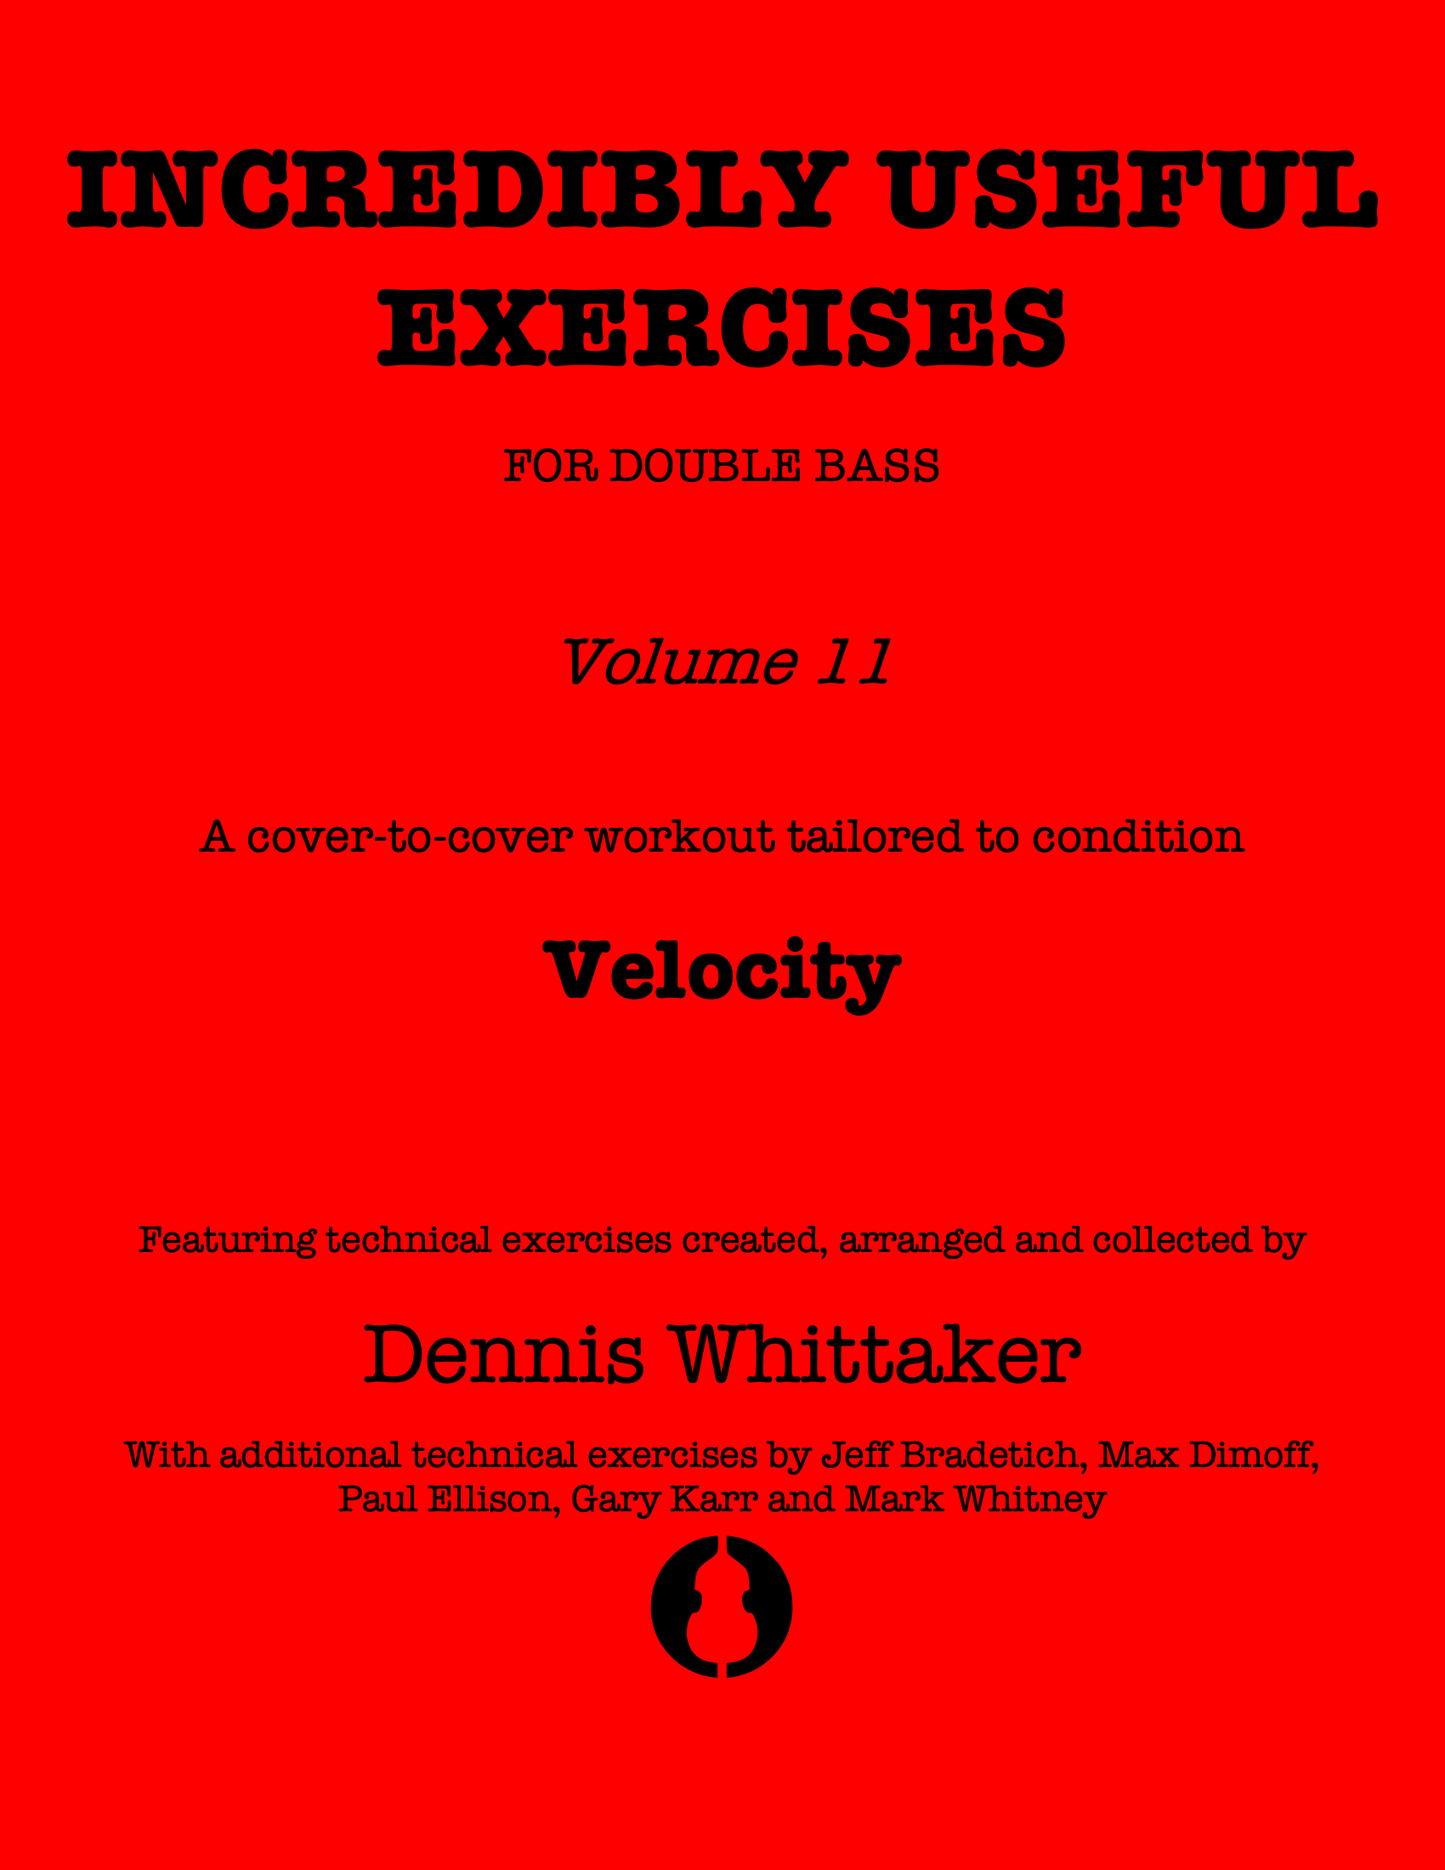 Incredibly Useful Exercises for Double Bass, Vol. 11, Velocity